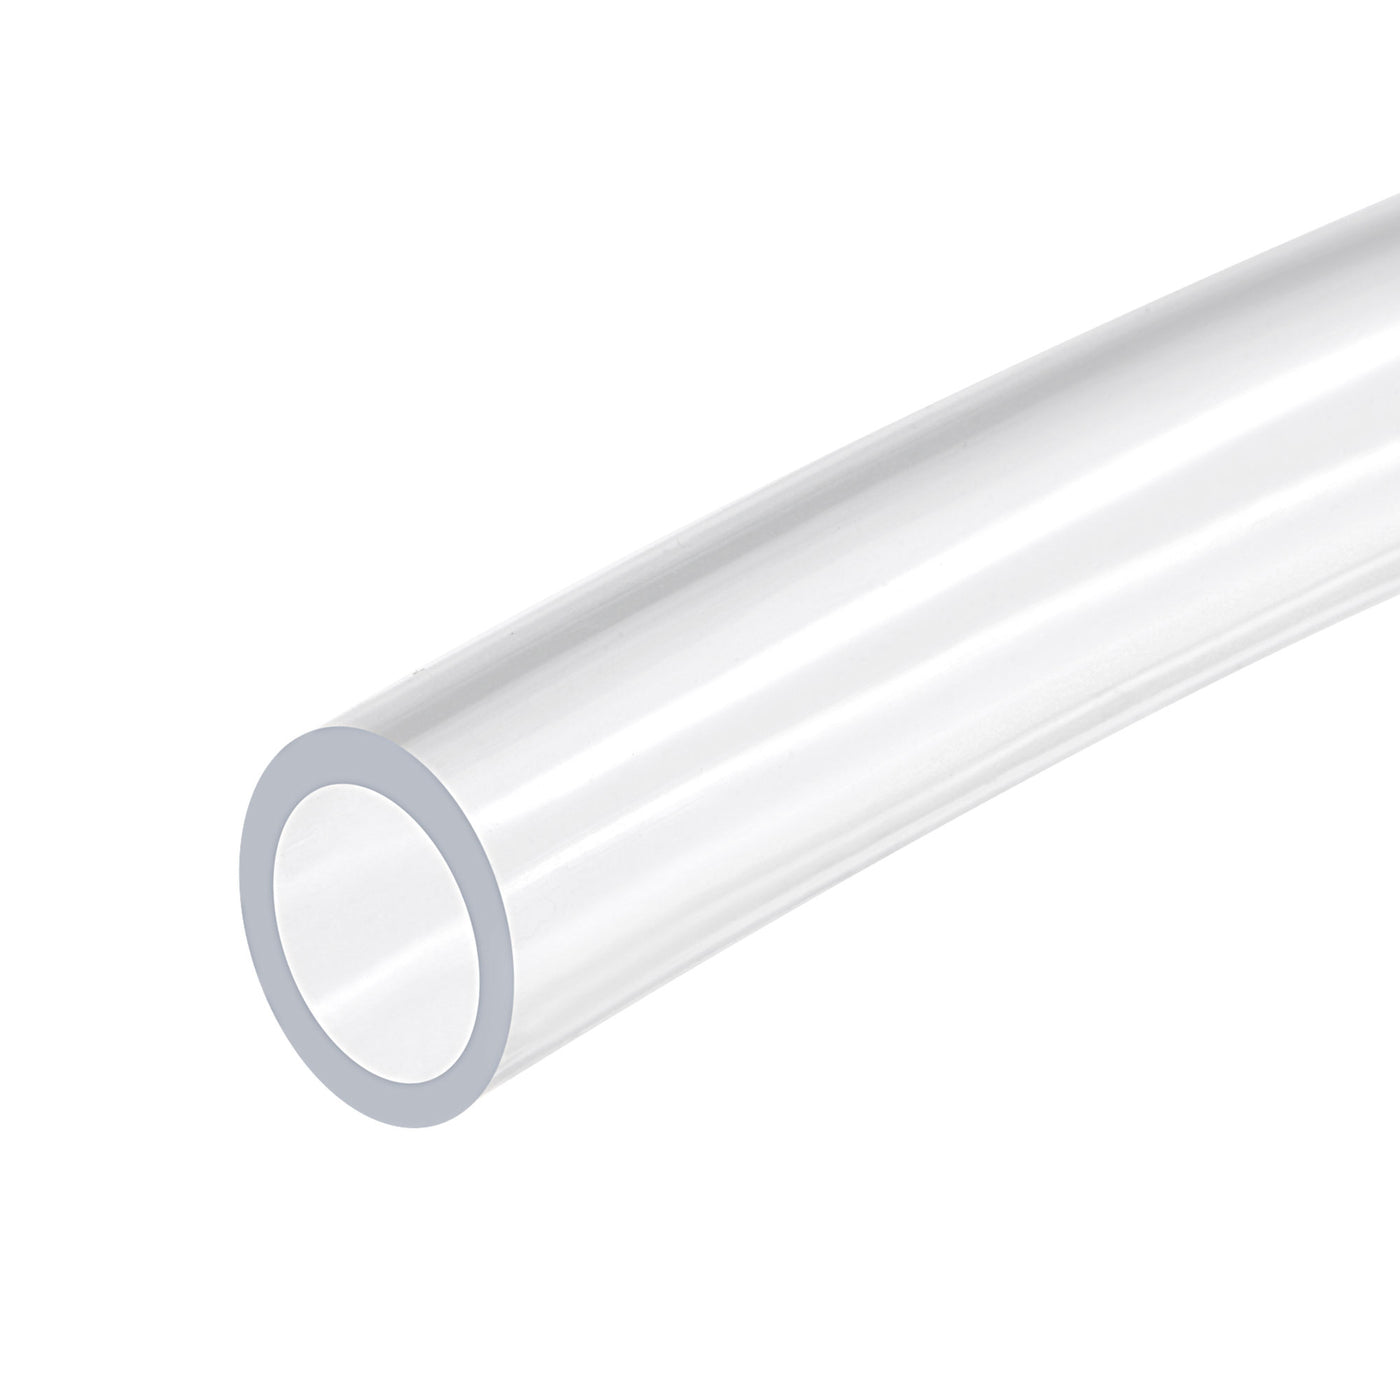 uxcell Uxcell PVC Clear Vinyl Tubing, 12mm ID 16mm(5/8-inch) OD 8ft Plastic Pipe Air Water Hose